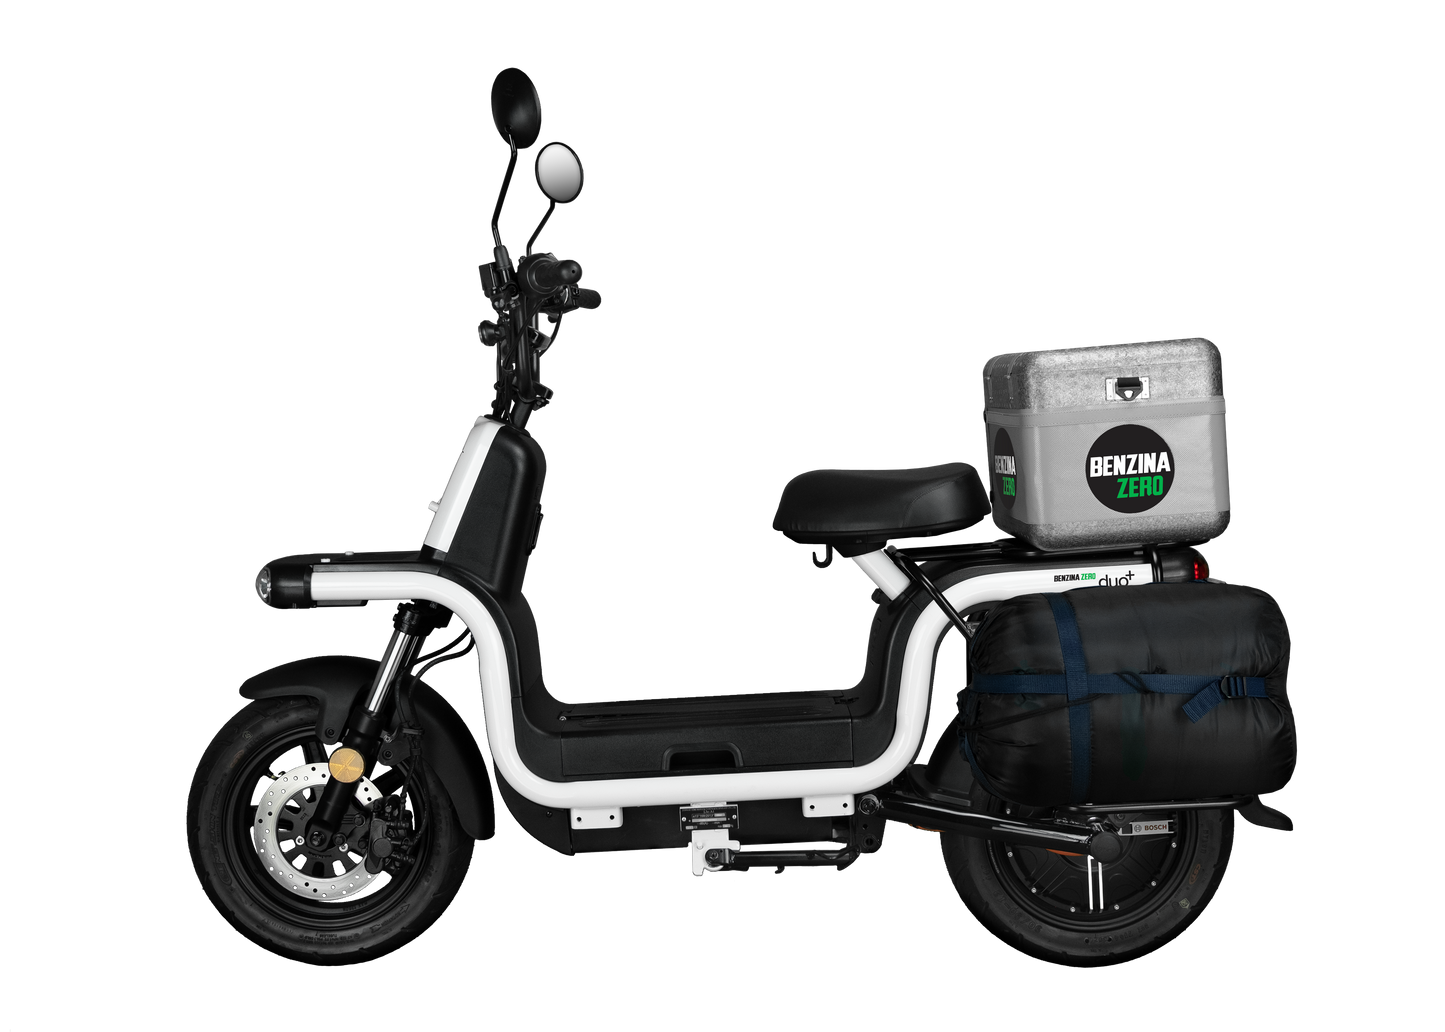 Duo/Duo+ Rear Luggage Carrier